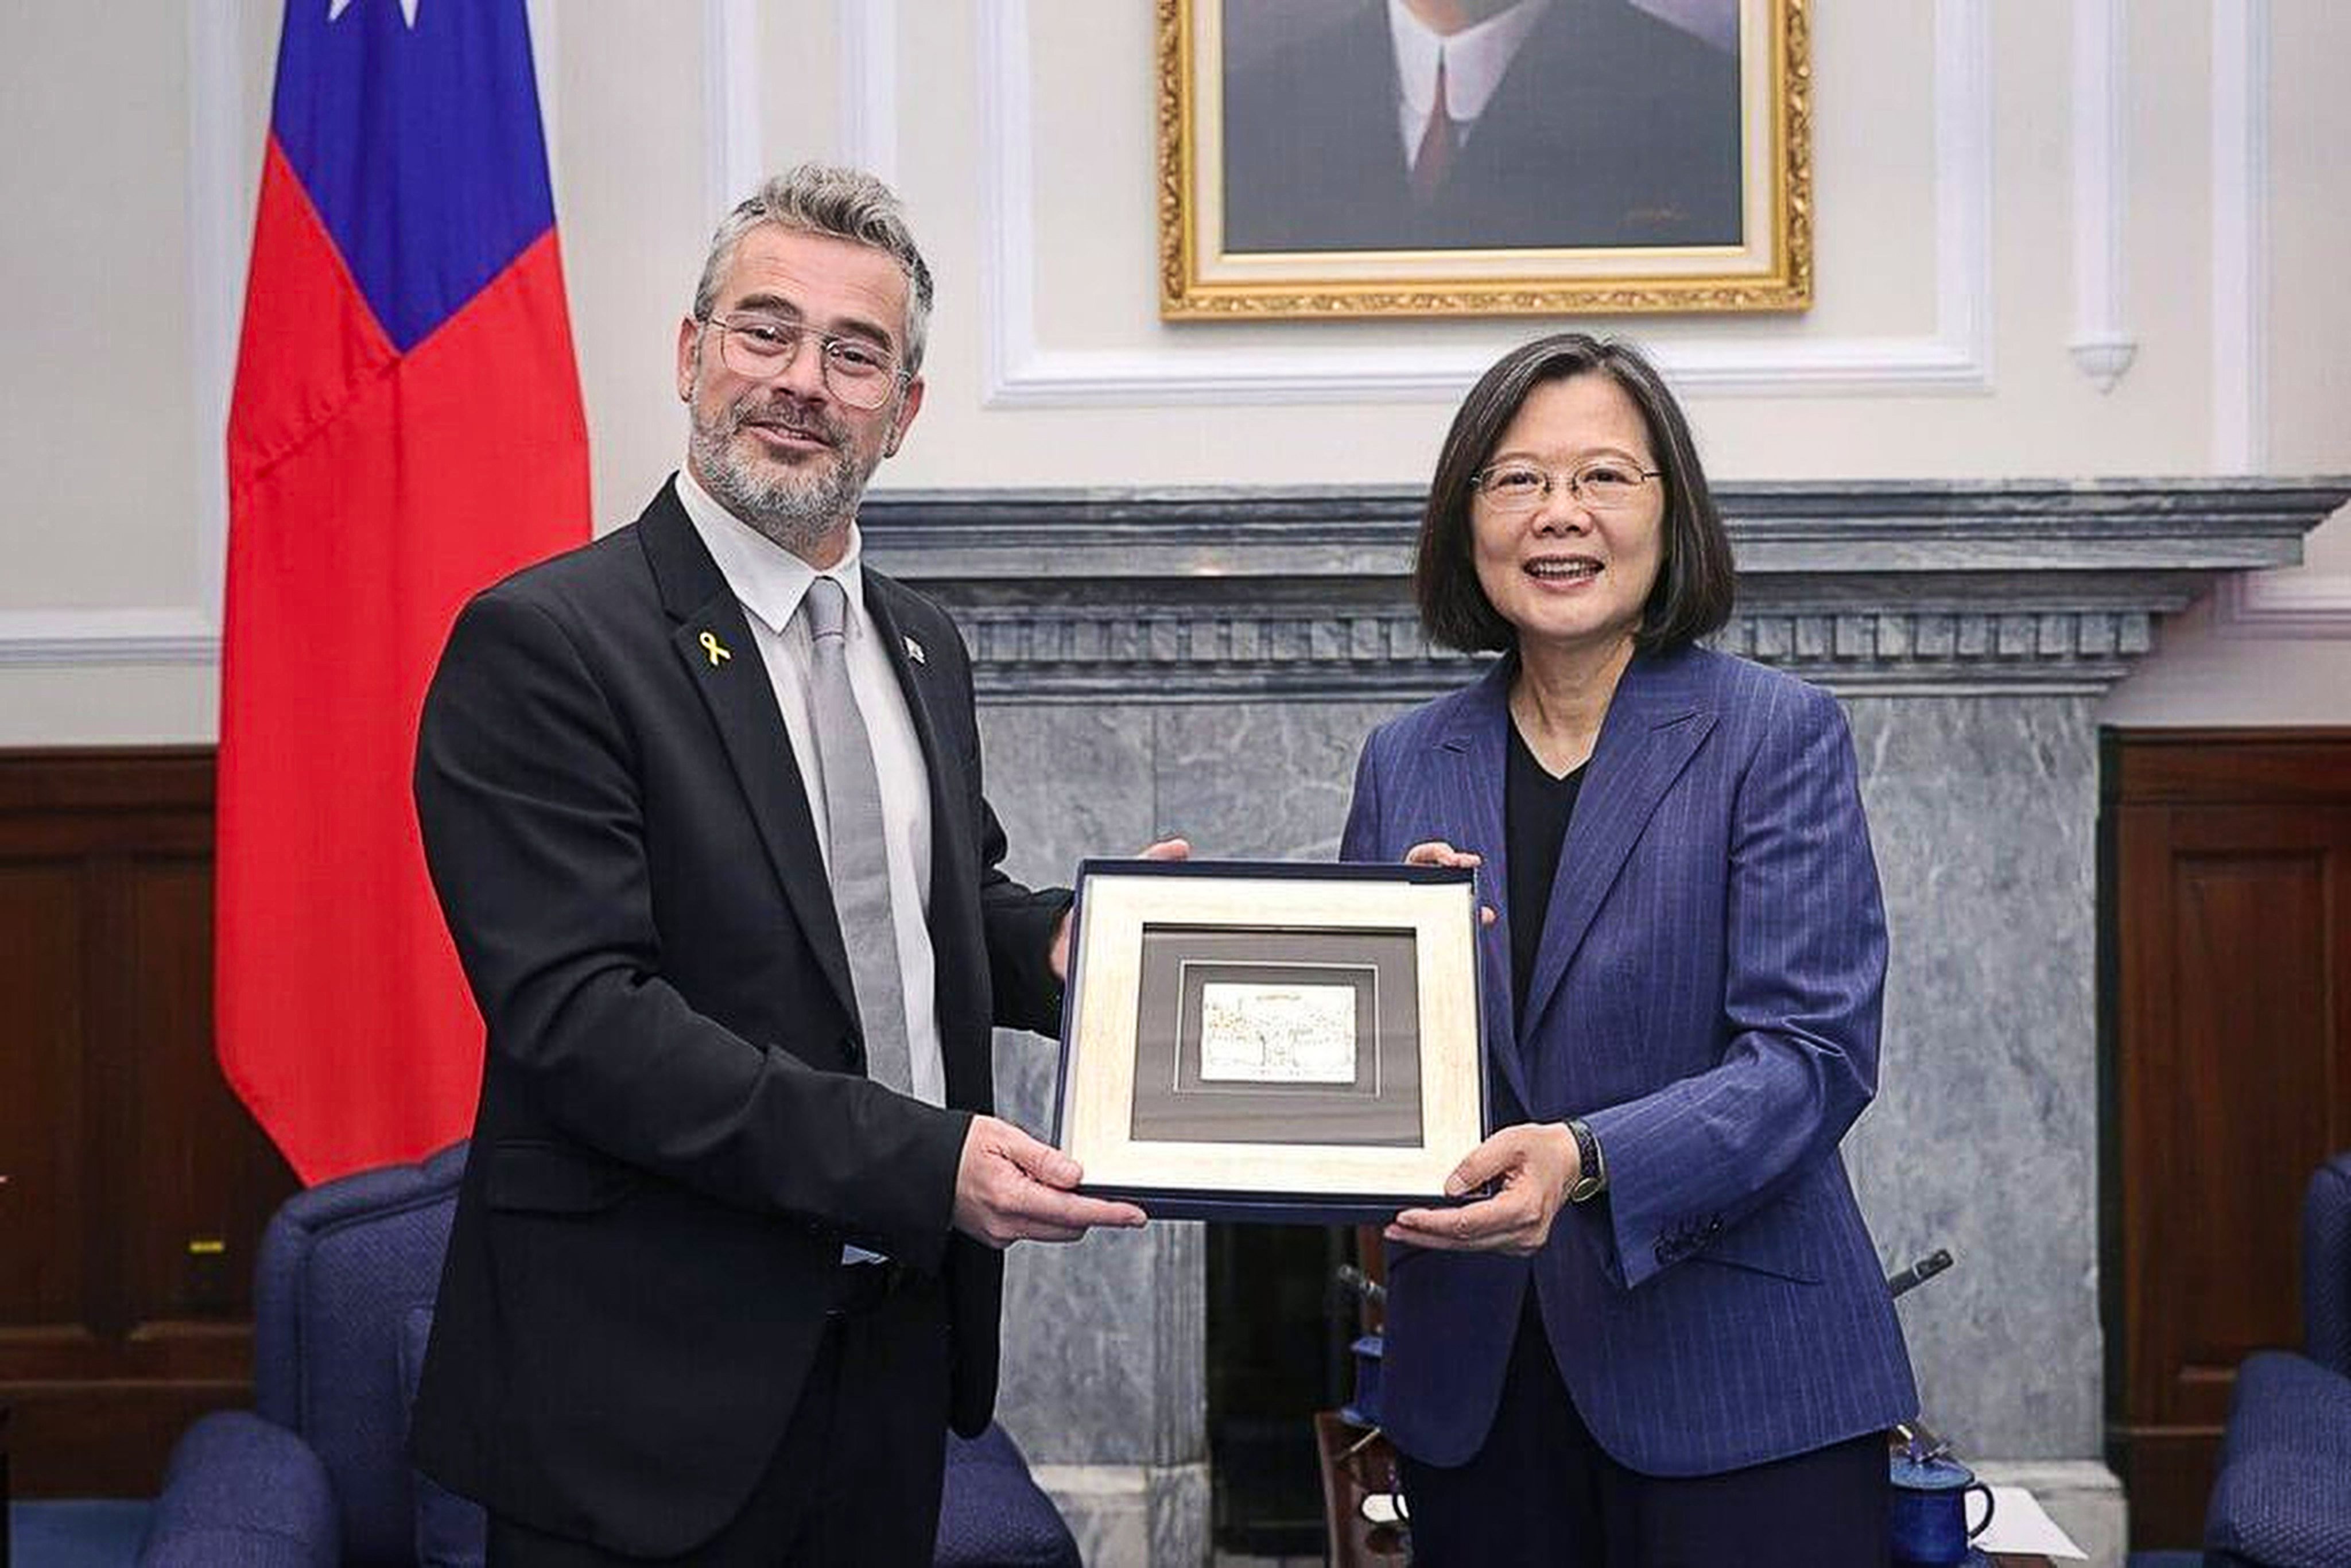 An Israeli cross-party delegation led by chair of the Knesset’s Israel-Taiwan friendship association, Boaz Toporovsky, met government officials and legislators throughout the trip, including President Tsai Ing-wen. Photo: Handout